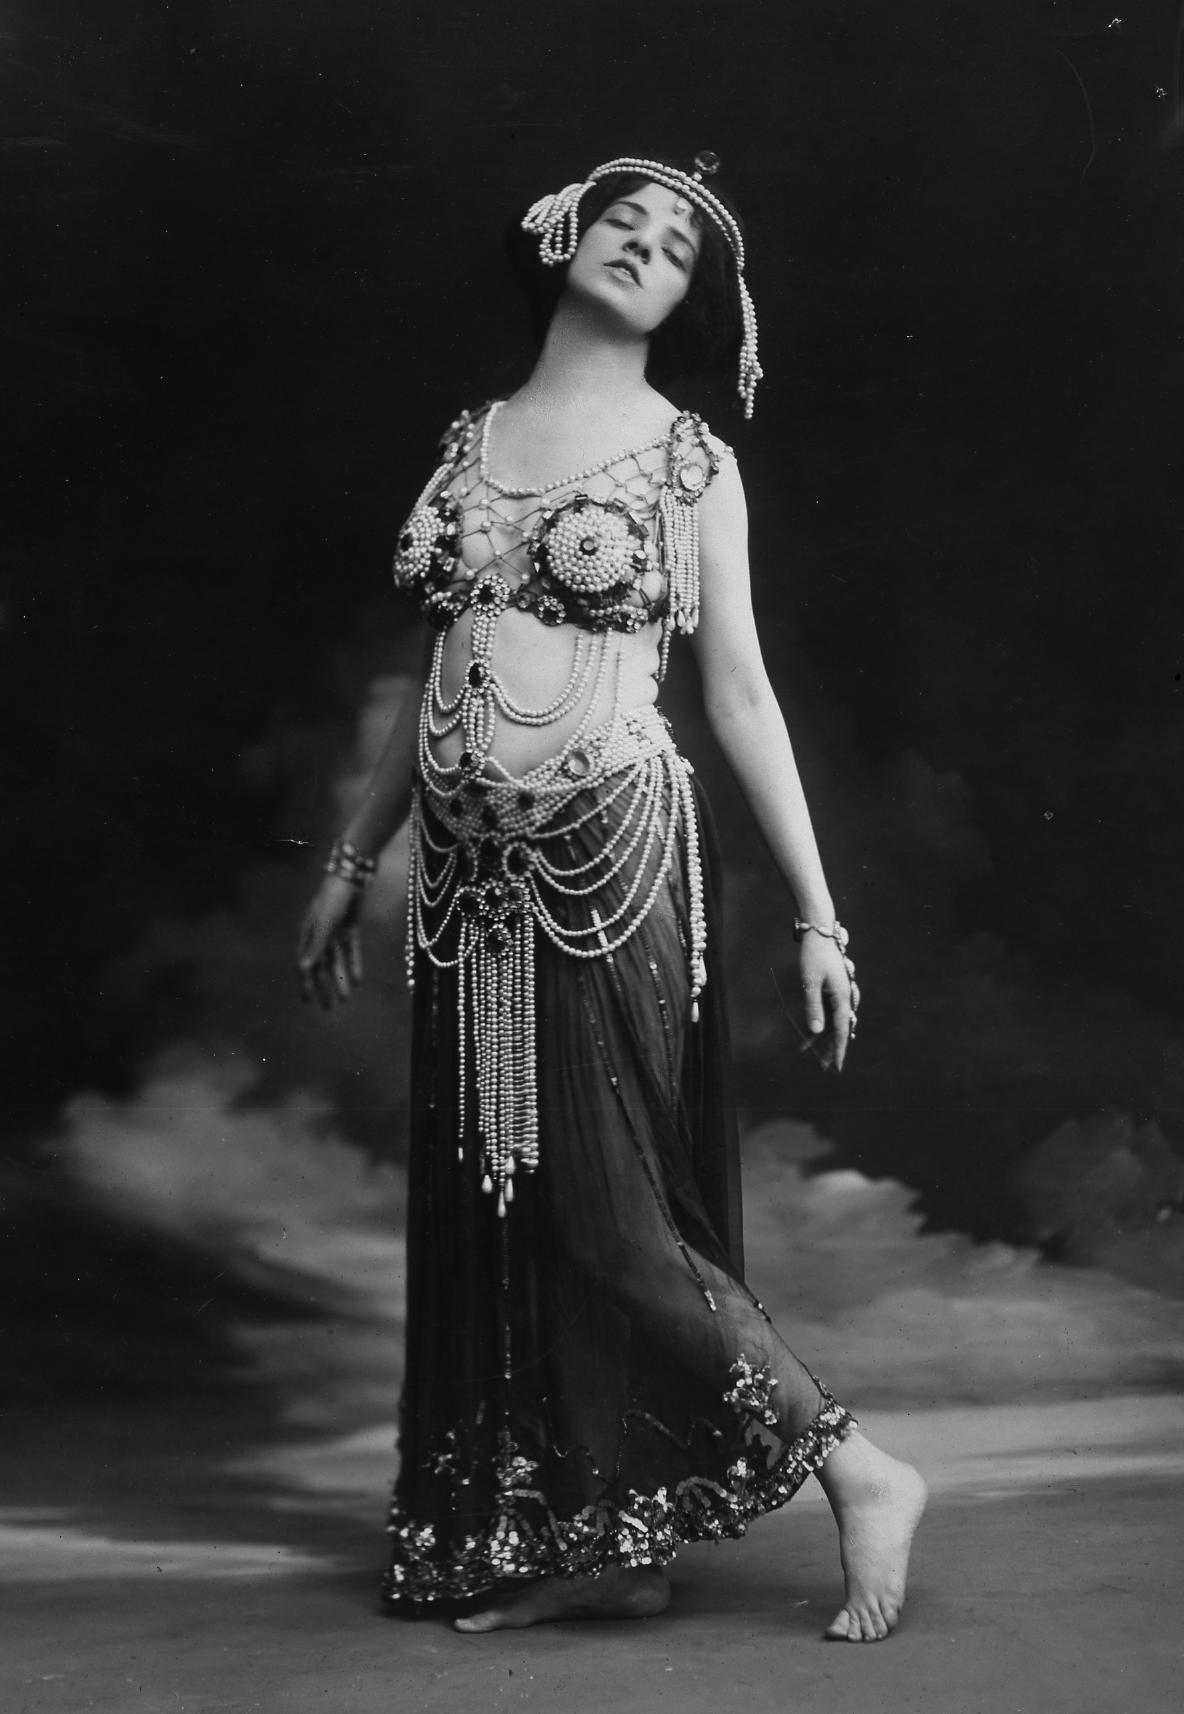 Photograph of Maud Allan dressed as 'Salome', 1910